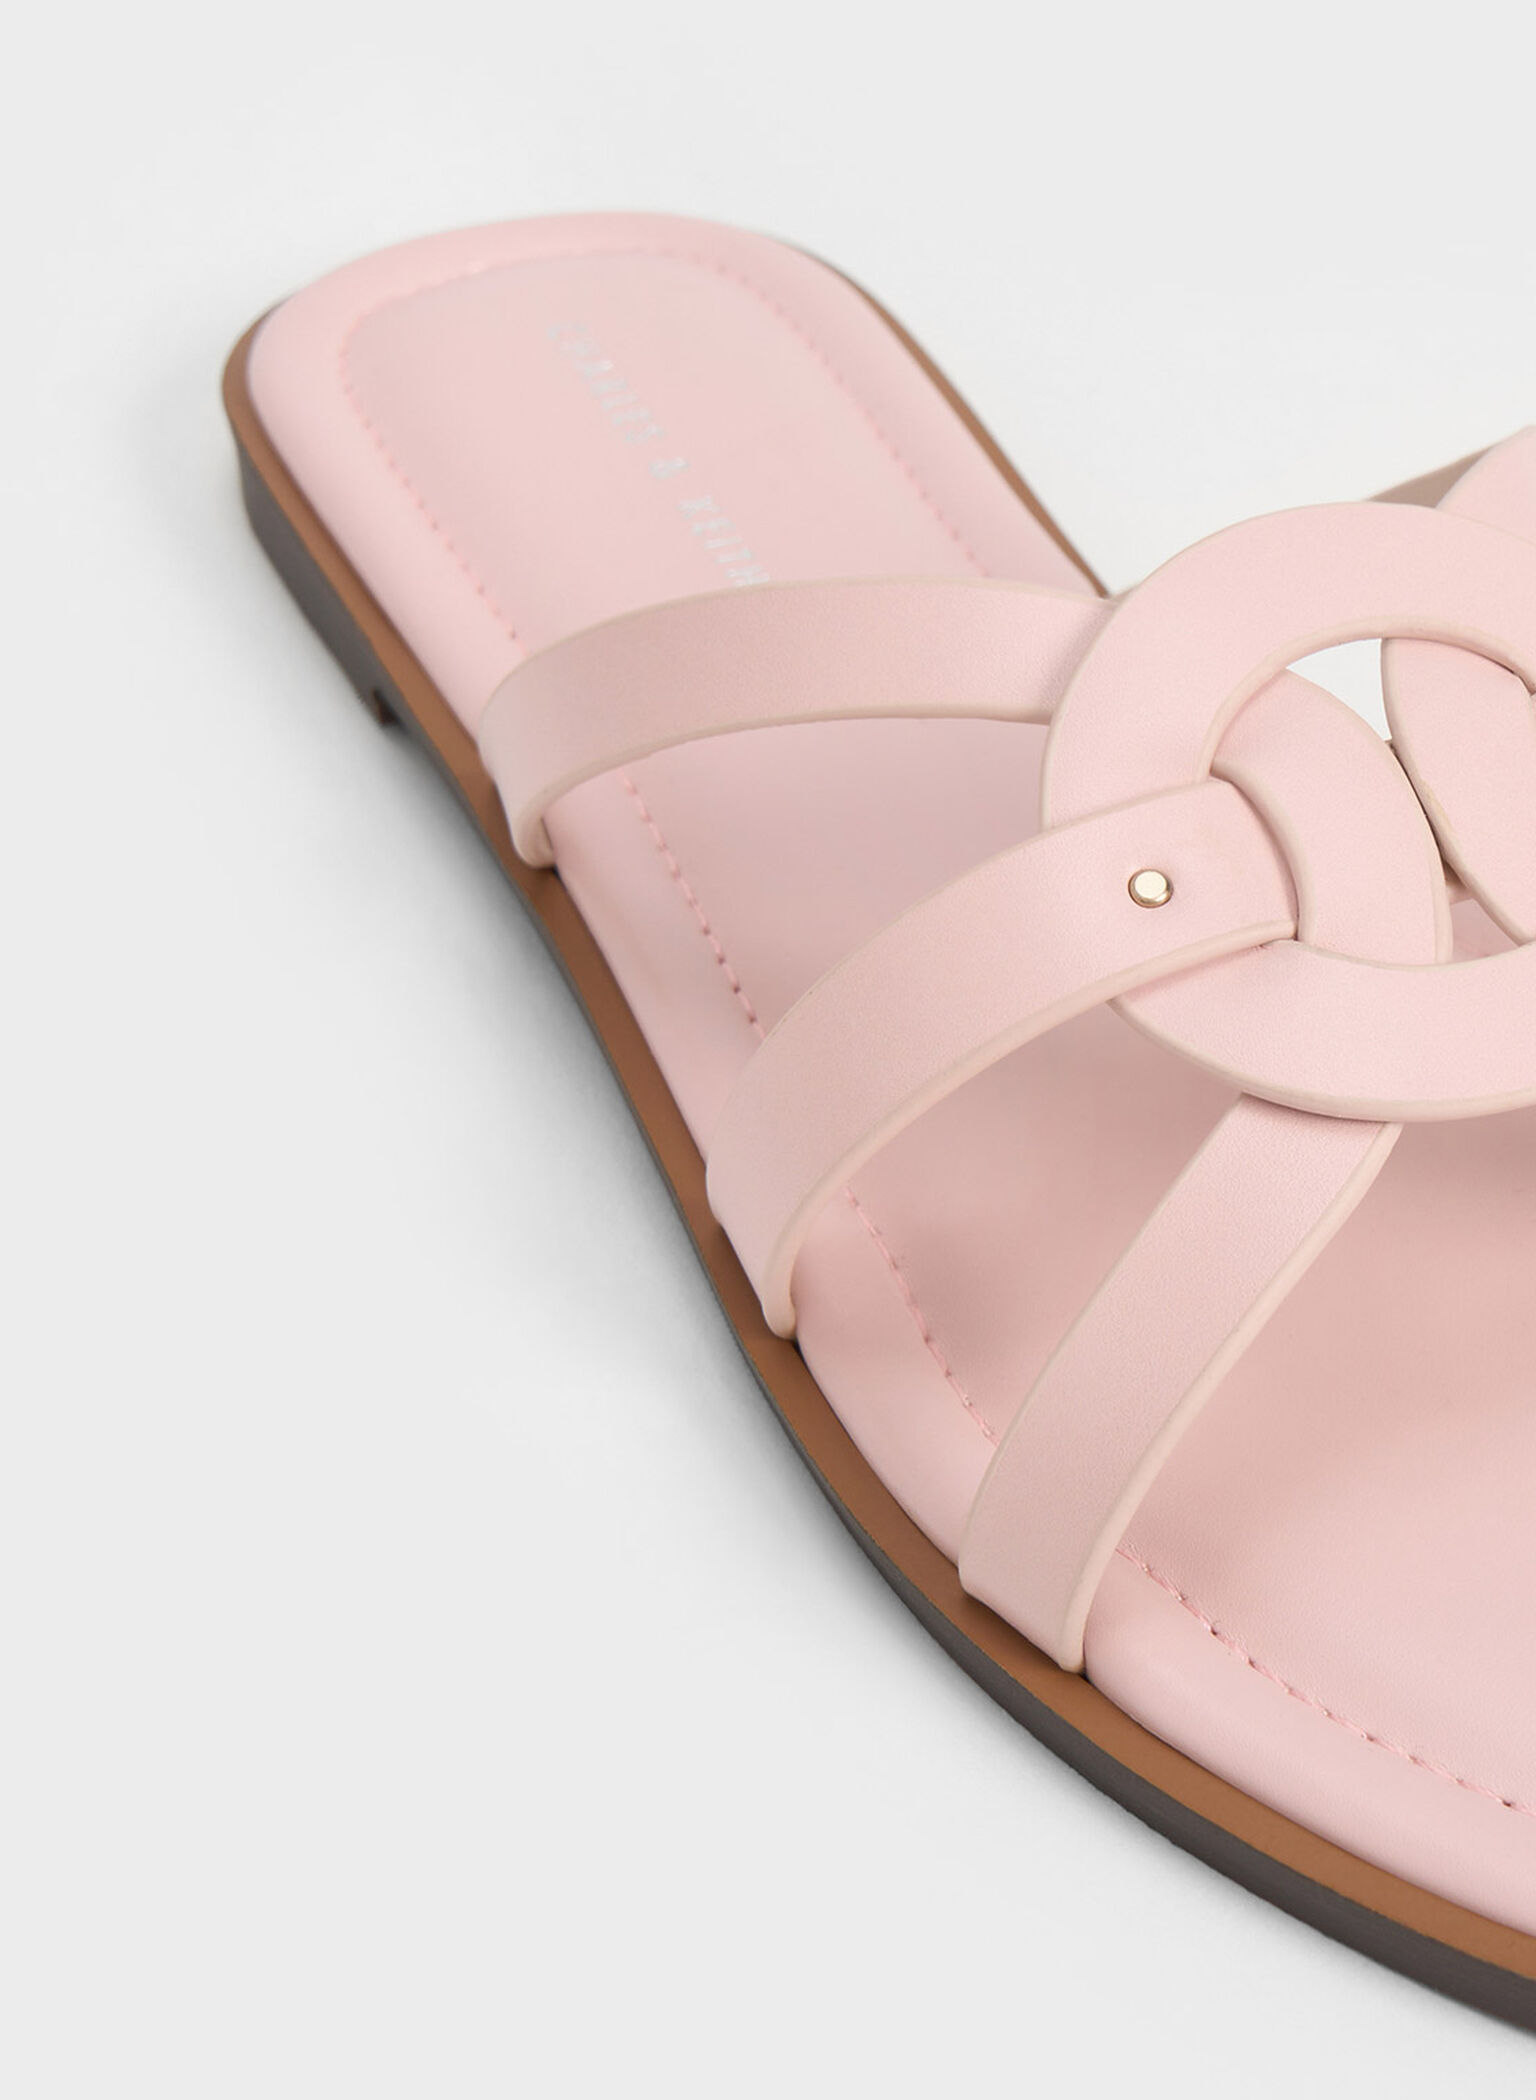 Ring Detail Strappy Flats, Light Pink, hi-res